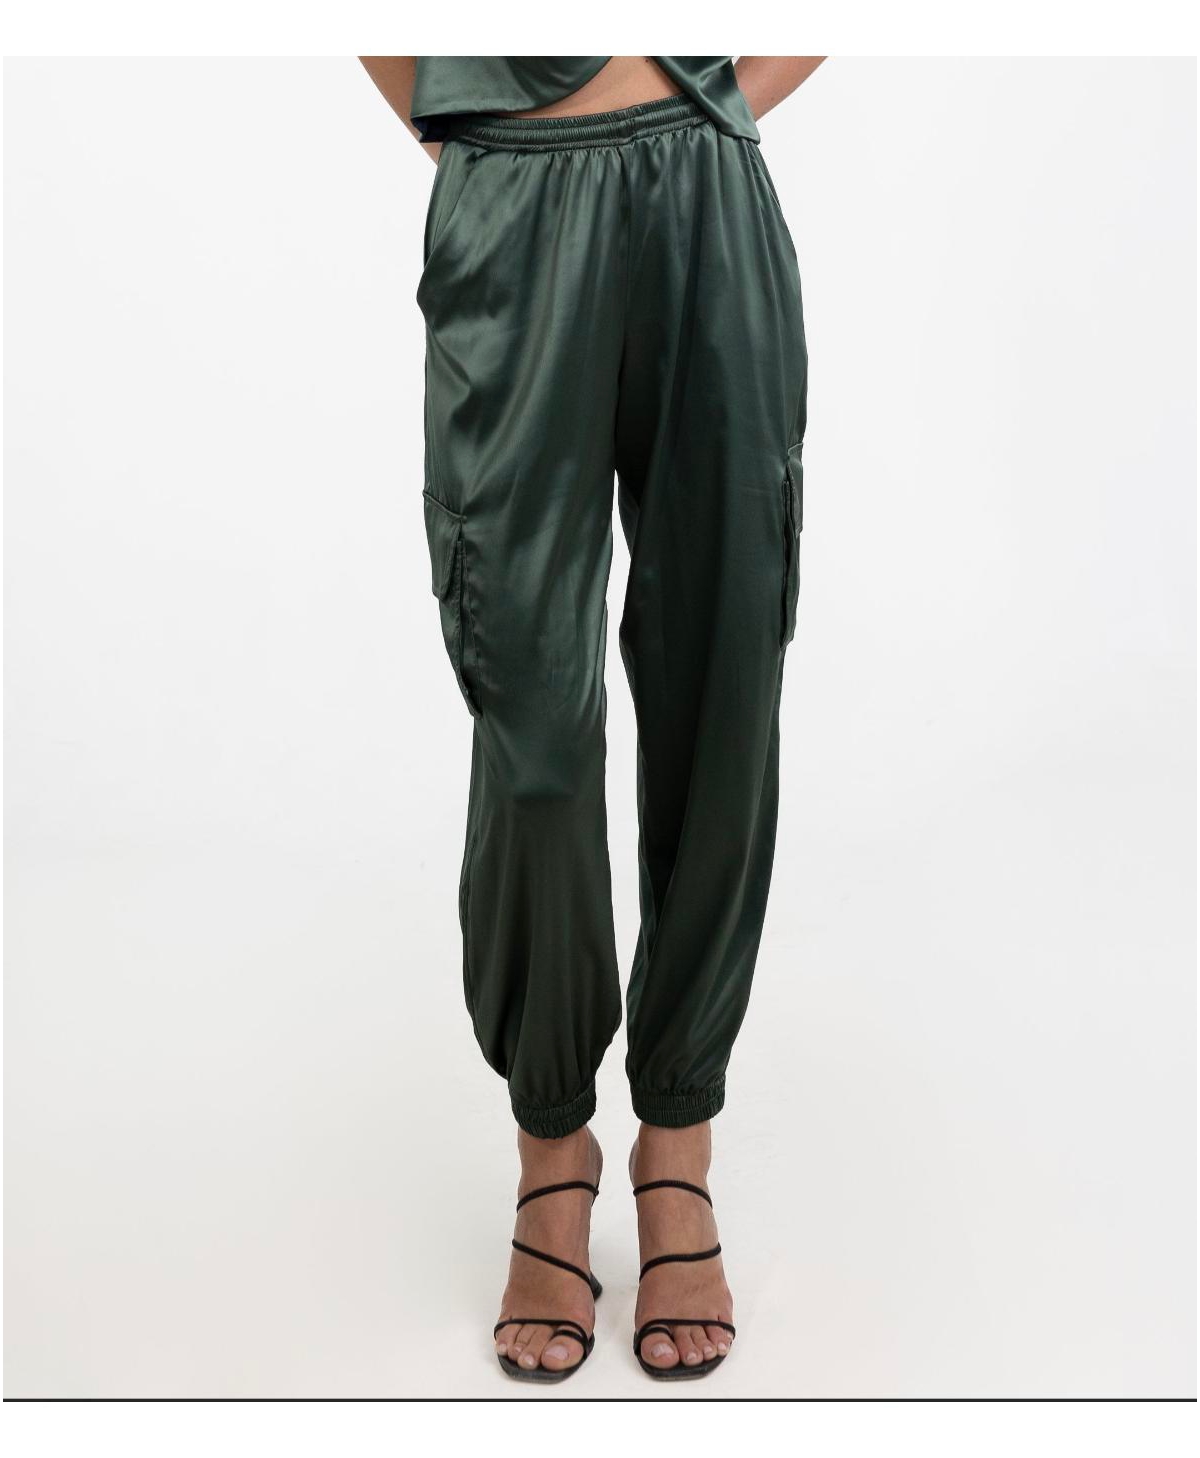 Luxury Satin Spandex Pants Jour by Entos - Olive green